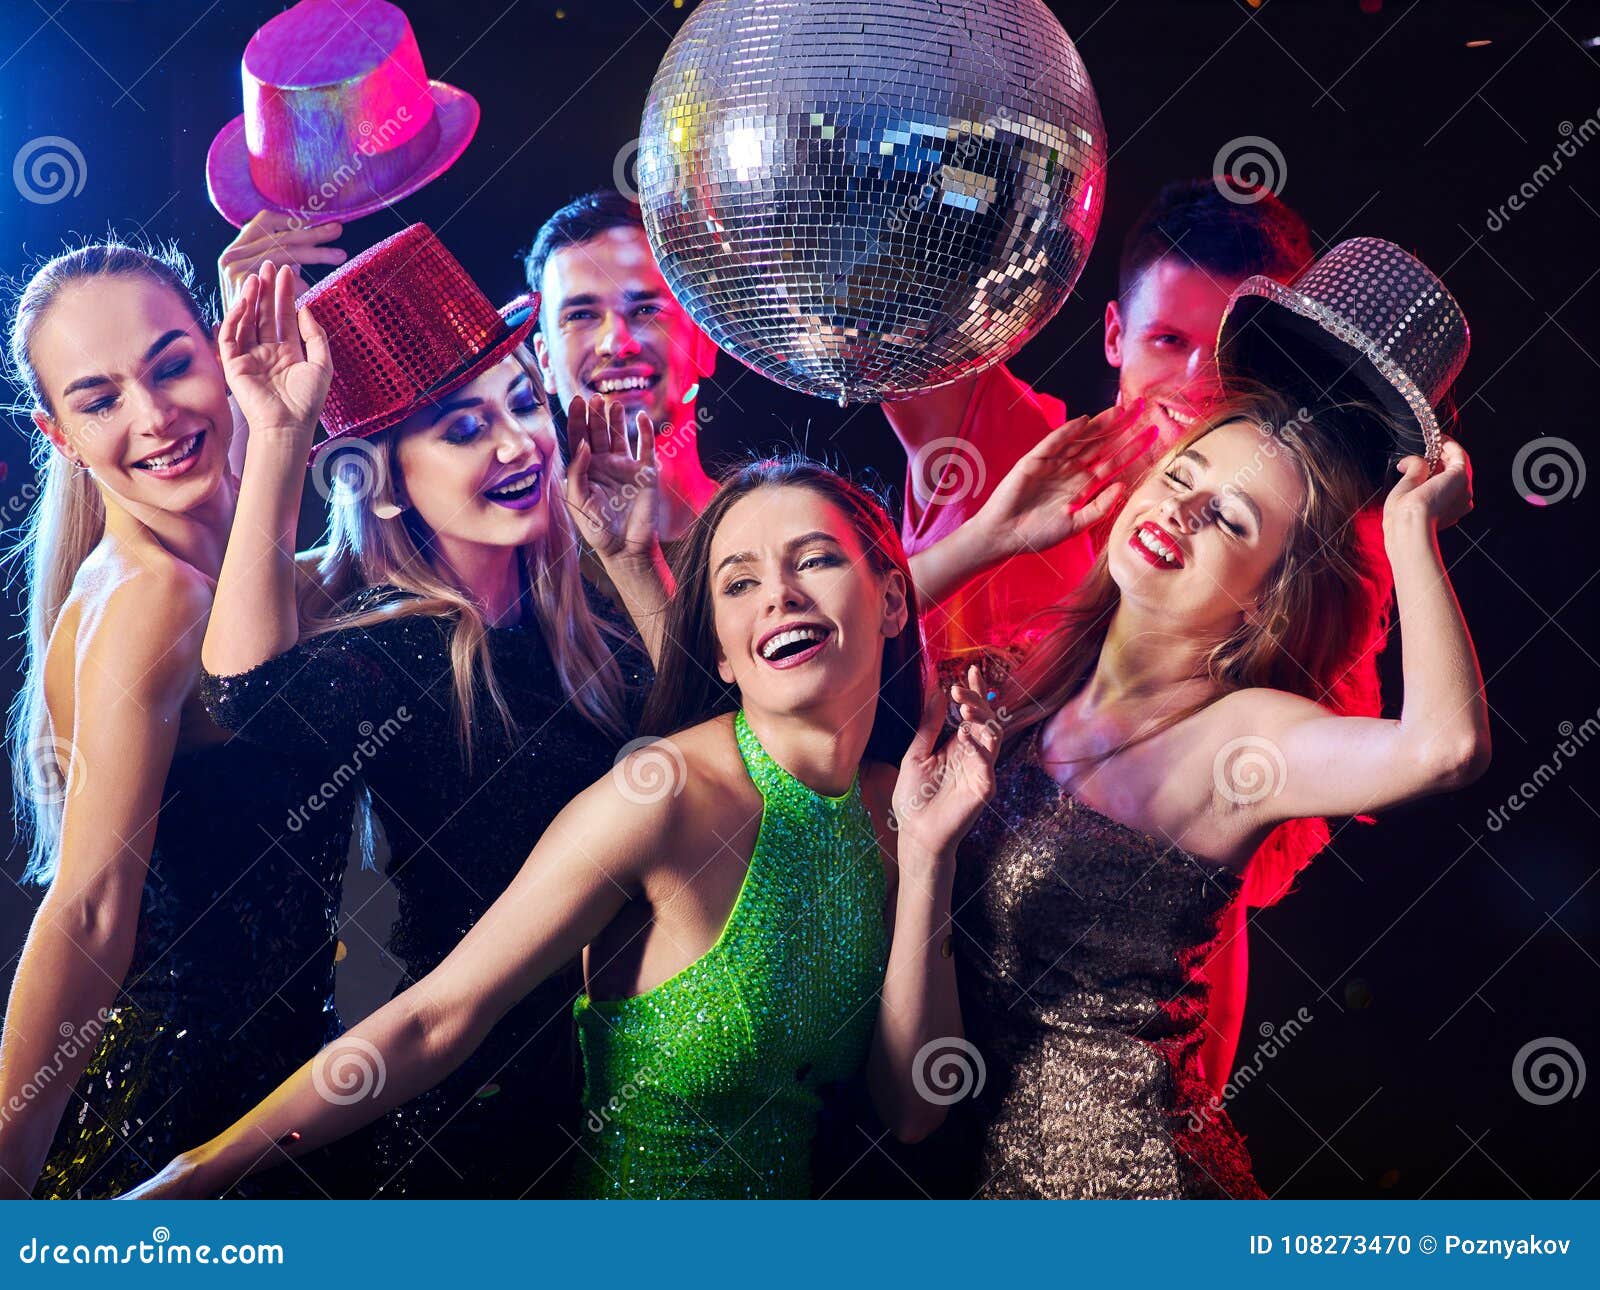 Dance Party With Group People Dancing And Disco Ball. Stock Photo.